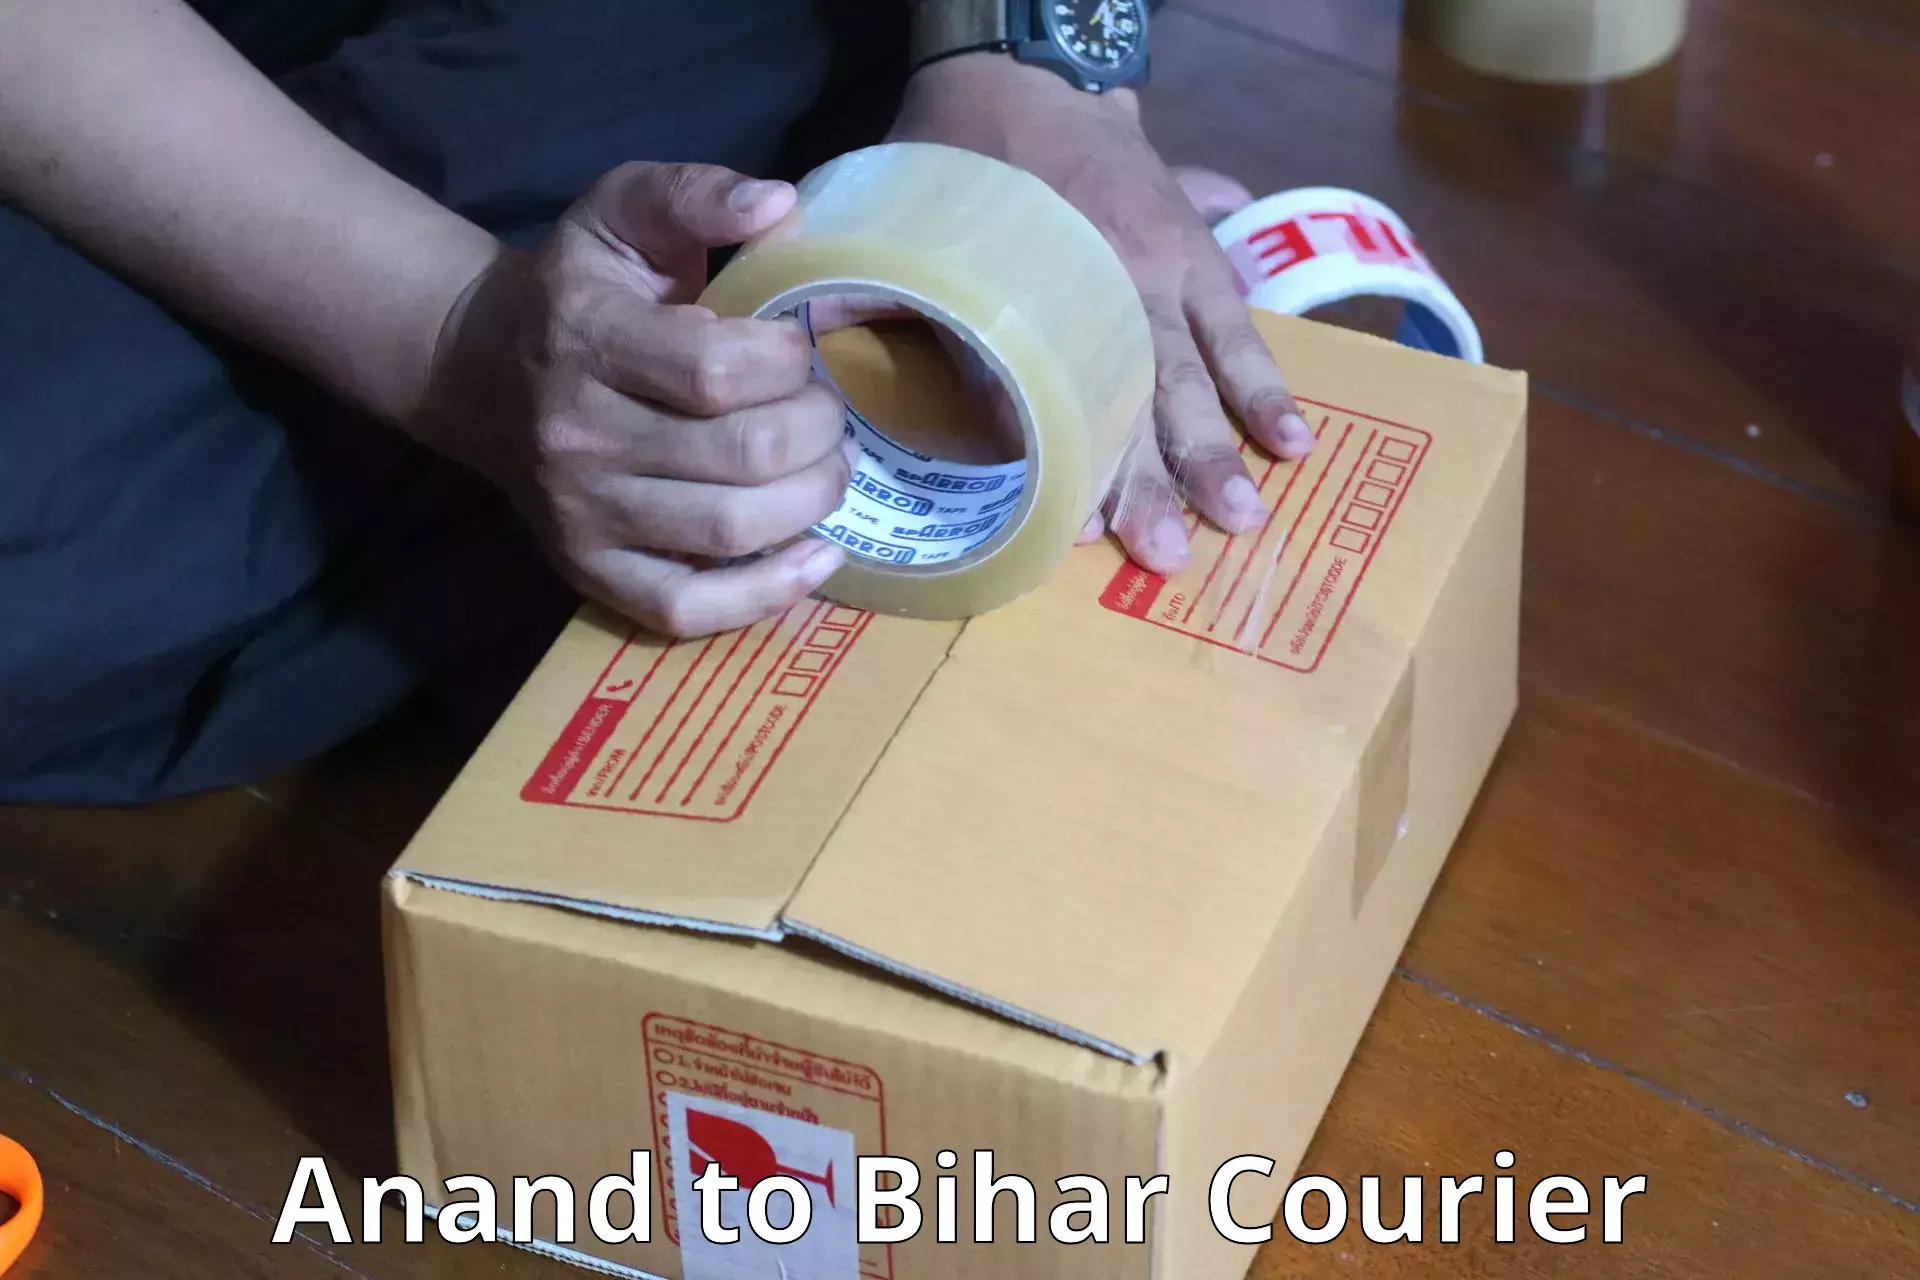 Luggage shipping planner Anand to Bihar